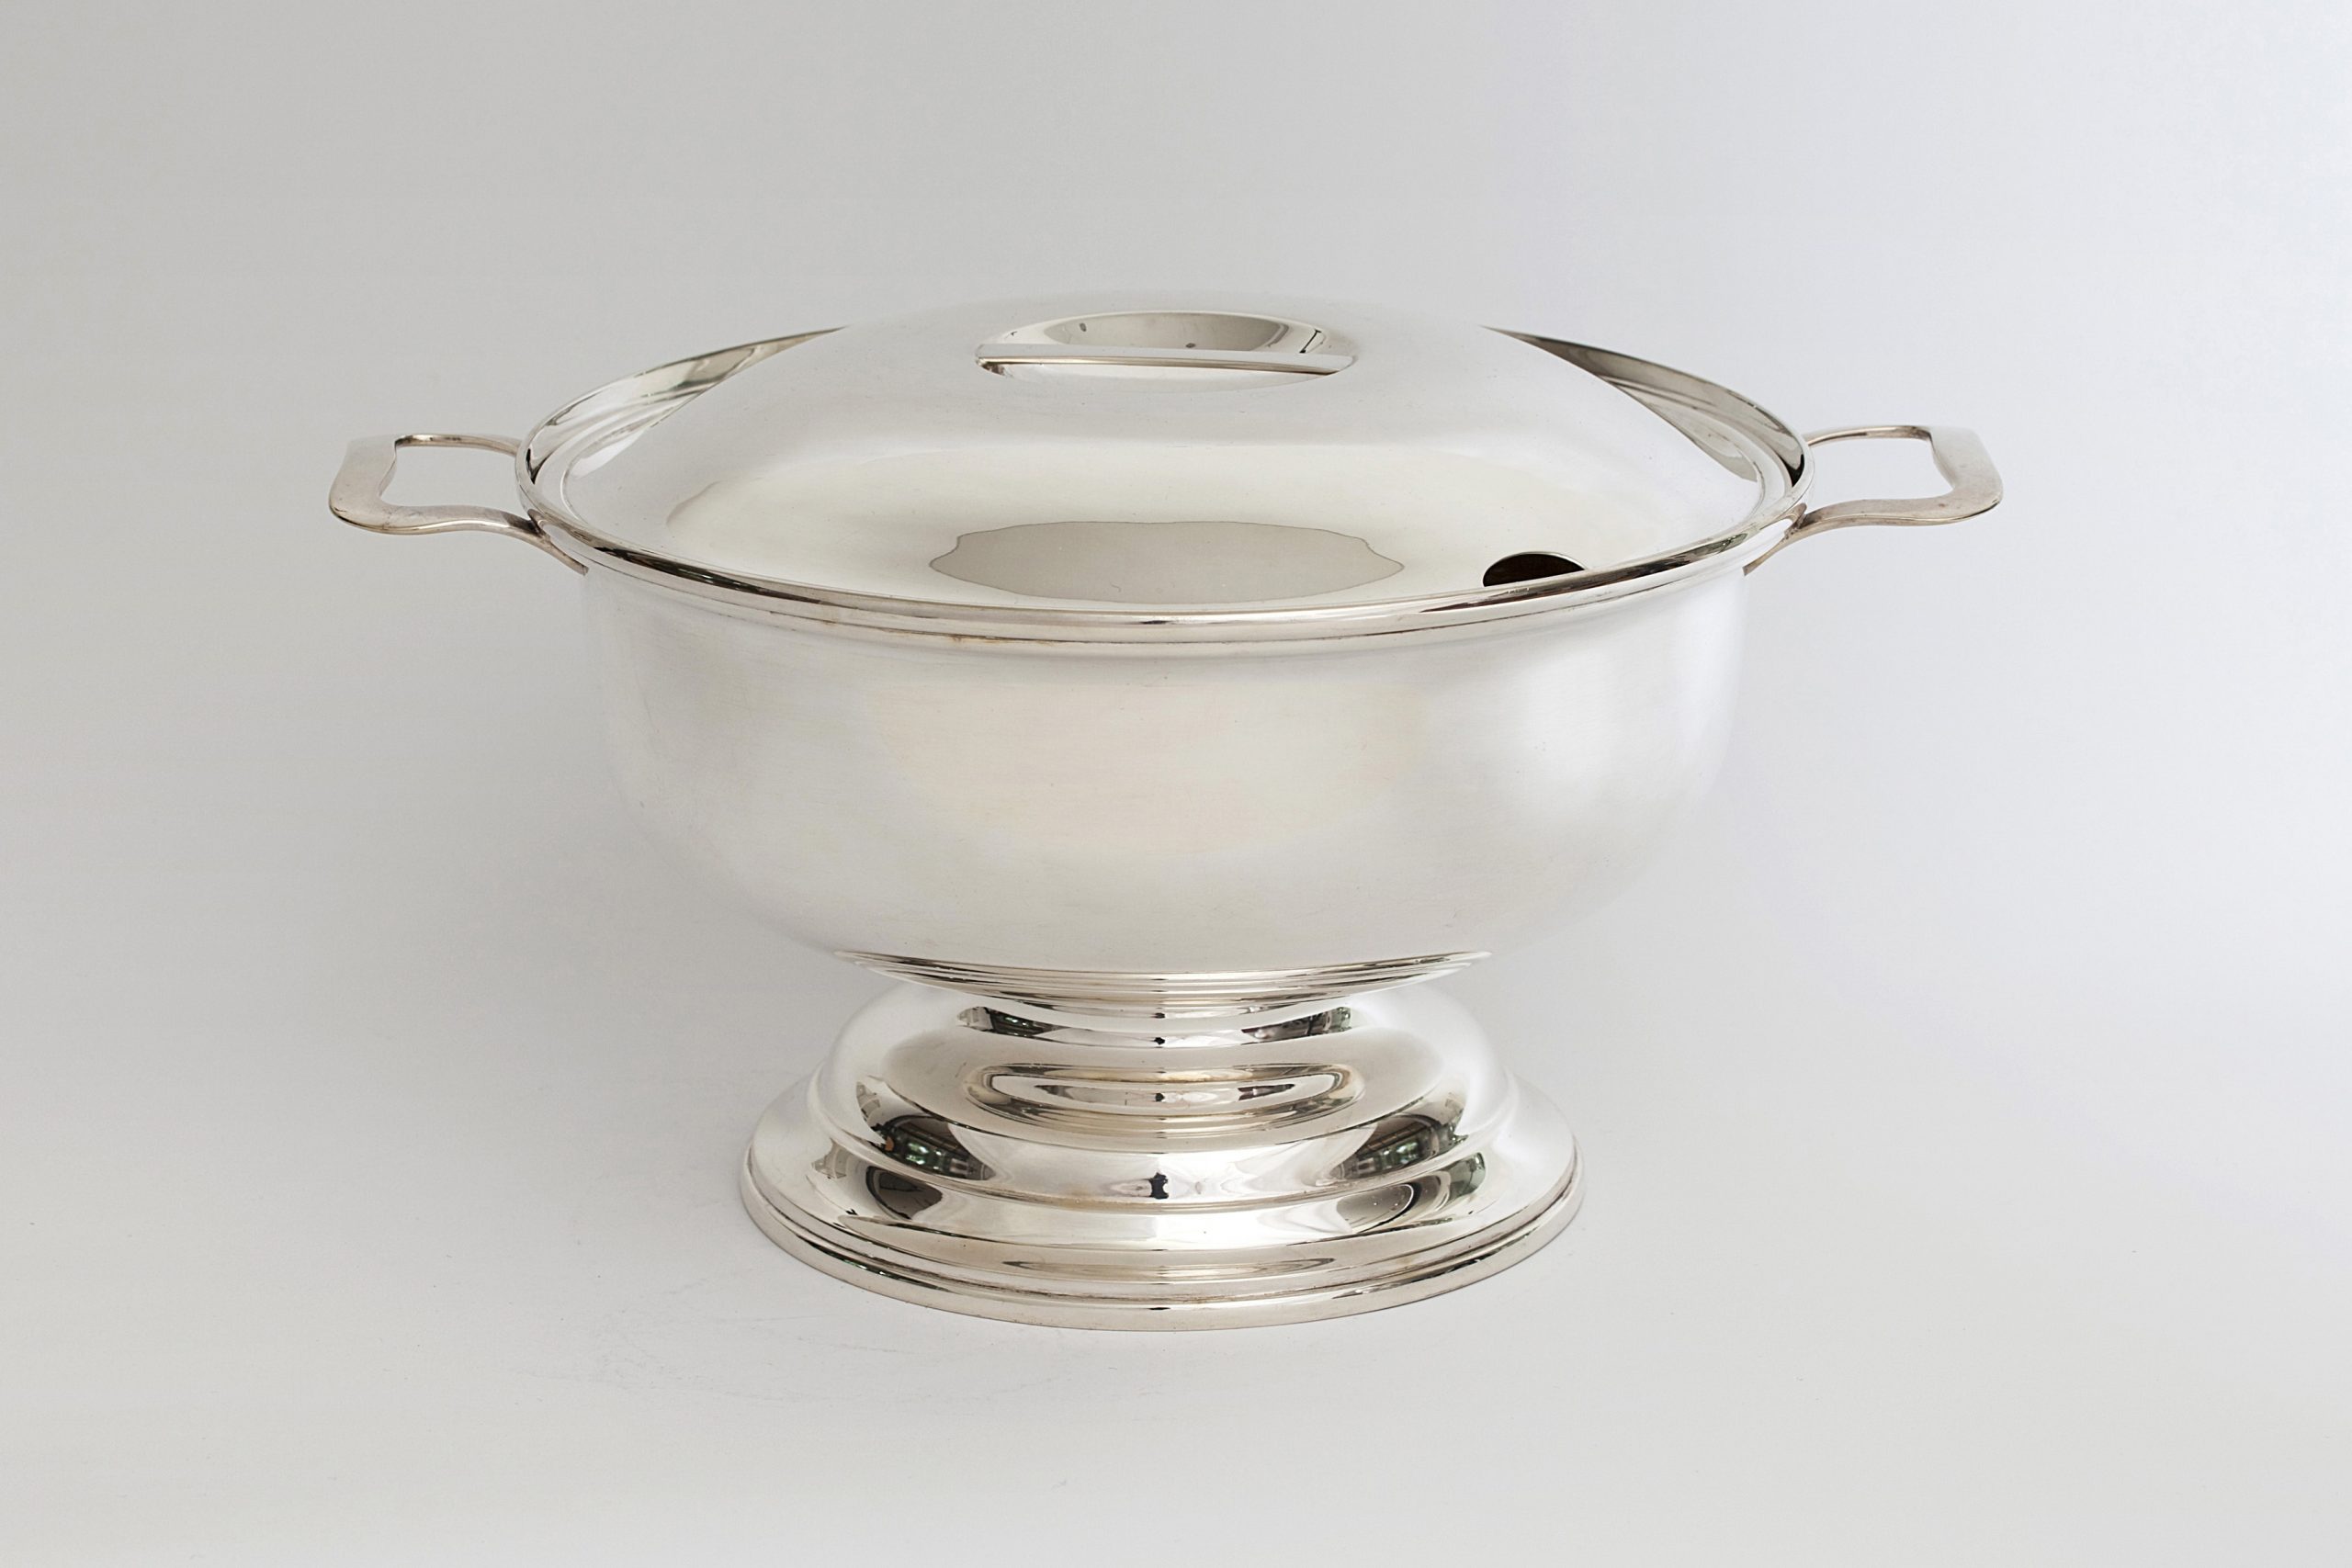 Sleek silver tureen with a cover